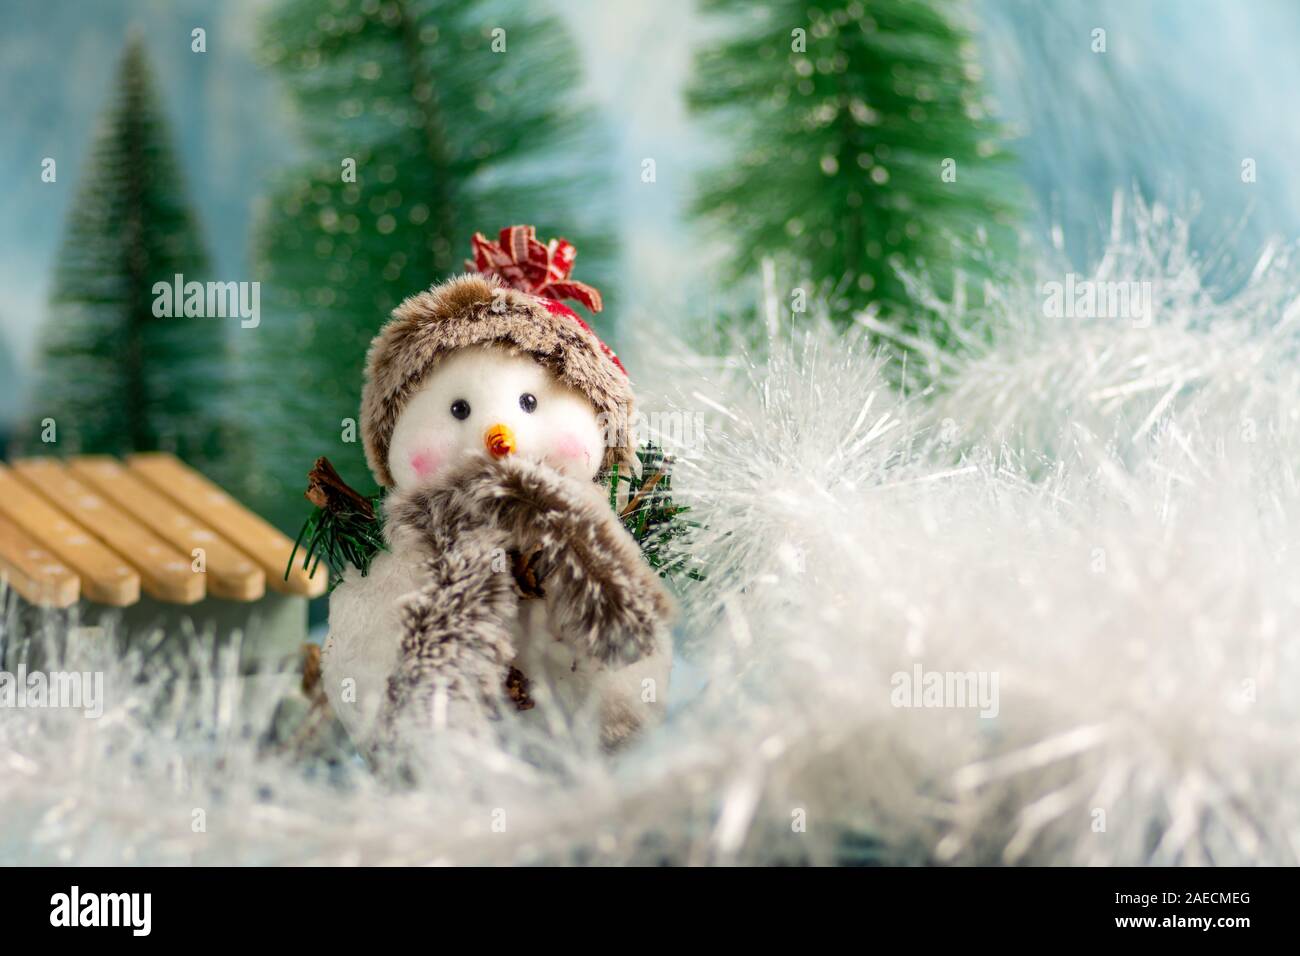 Toy snowman with festive Christmas holiday background Stock Photo